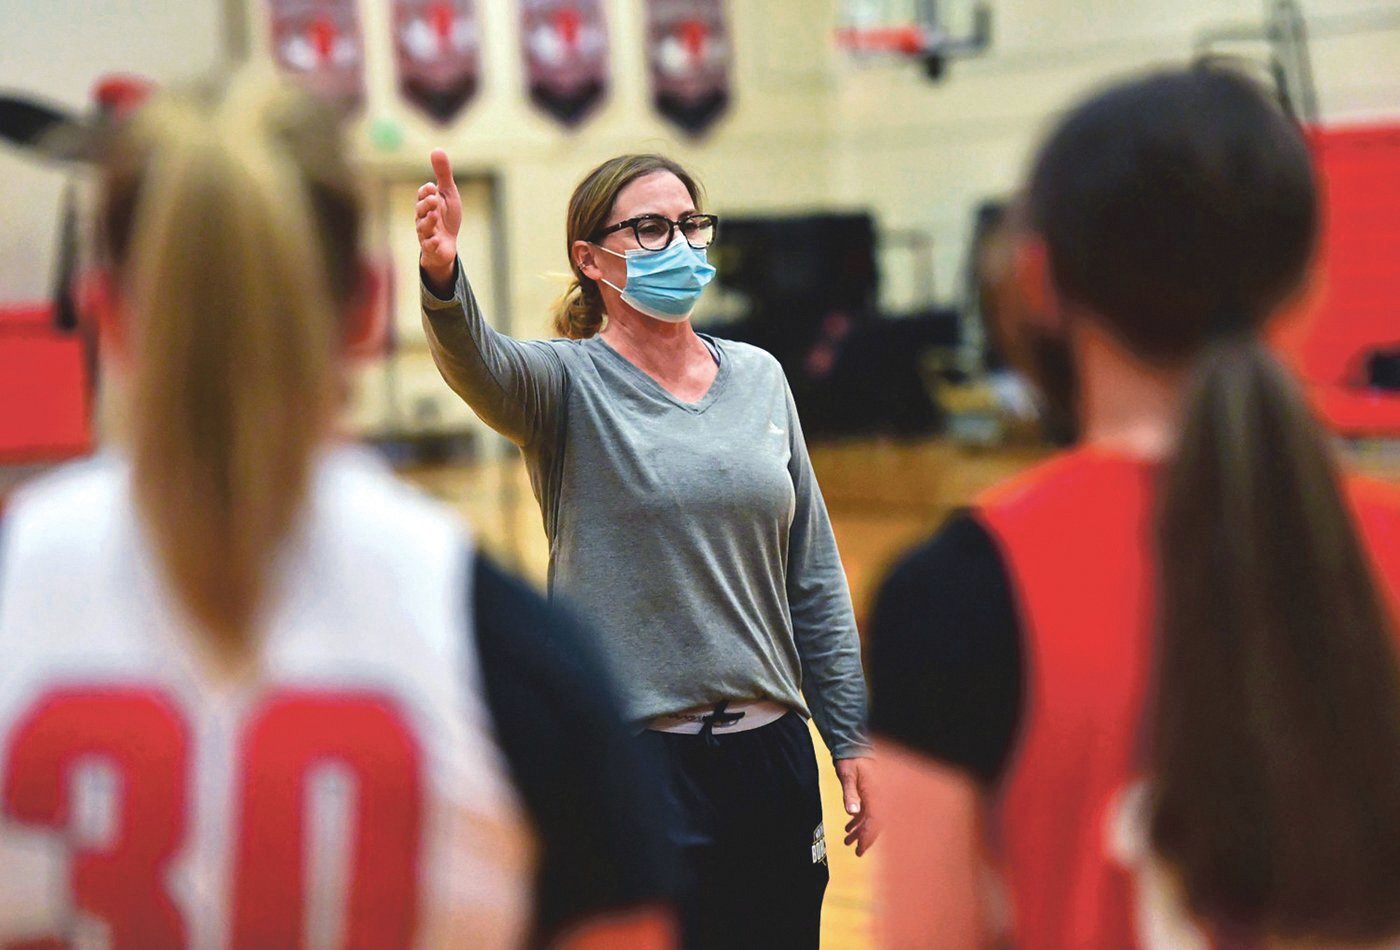 Jennifer Sleeman, Yelm High School girls basketball coach, instructs her team during practice on Monday, May 3, in the Yelm gym.